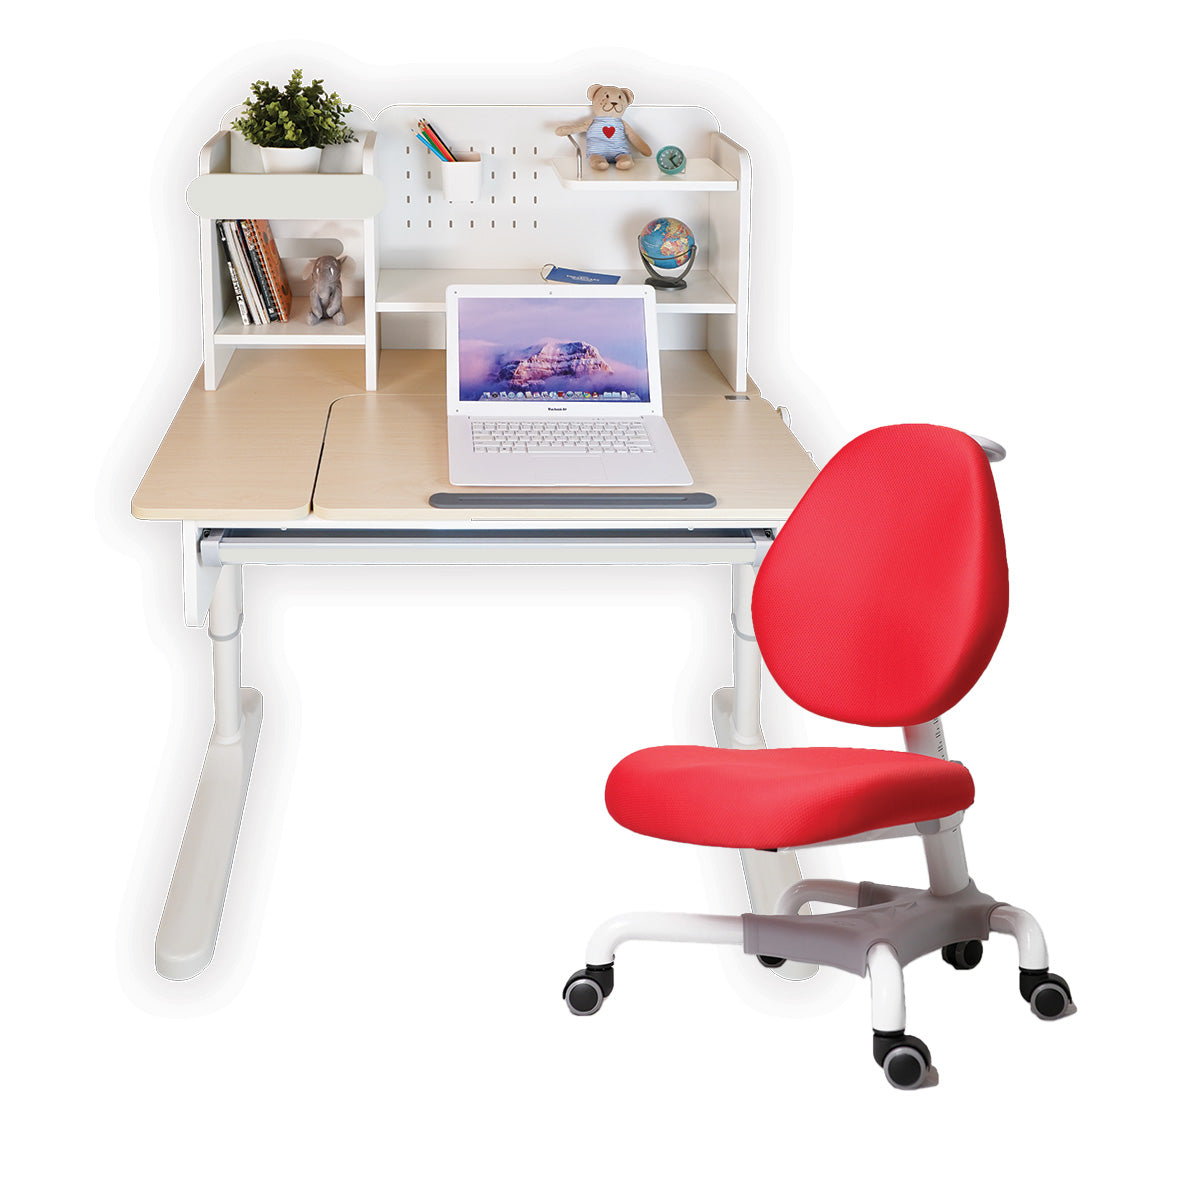 Impact Ergo-Growing Study Desk And Chair Set 1000mm x 650mm, IM-G1000A-GY (Ready Stocks)